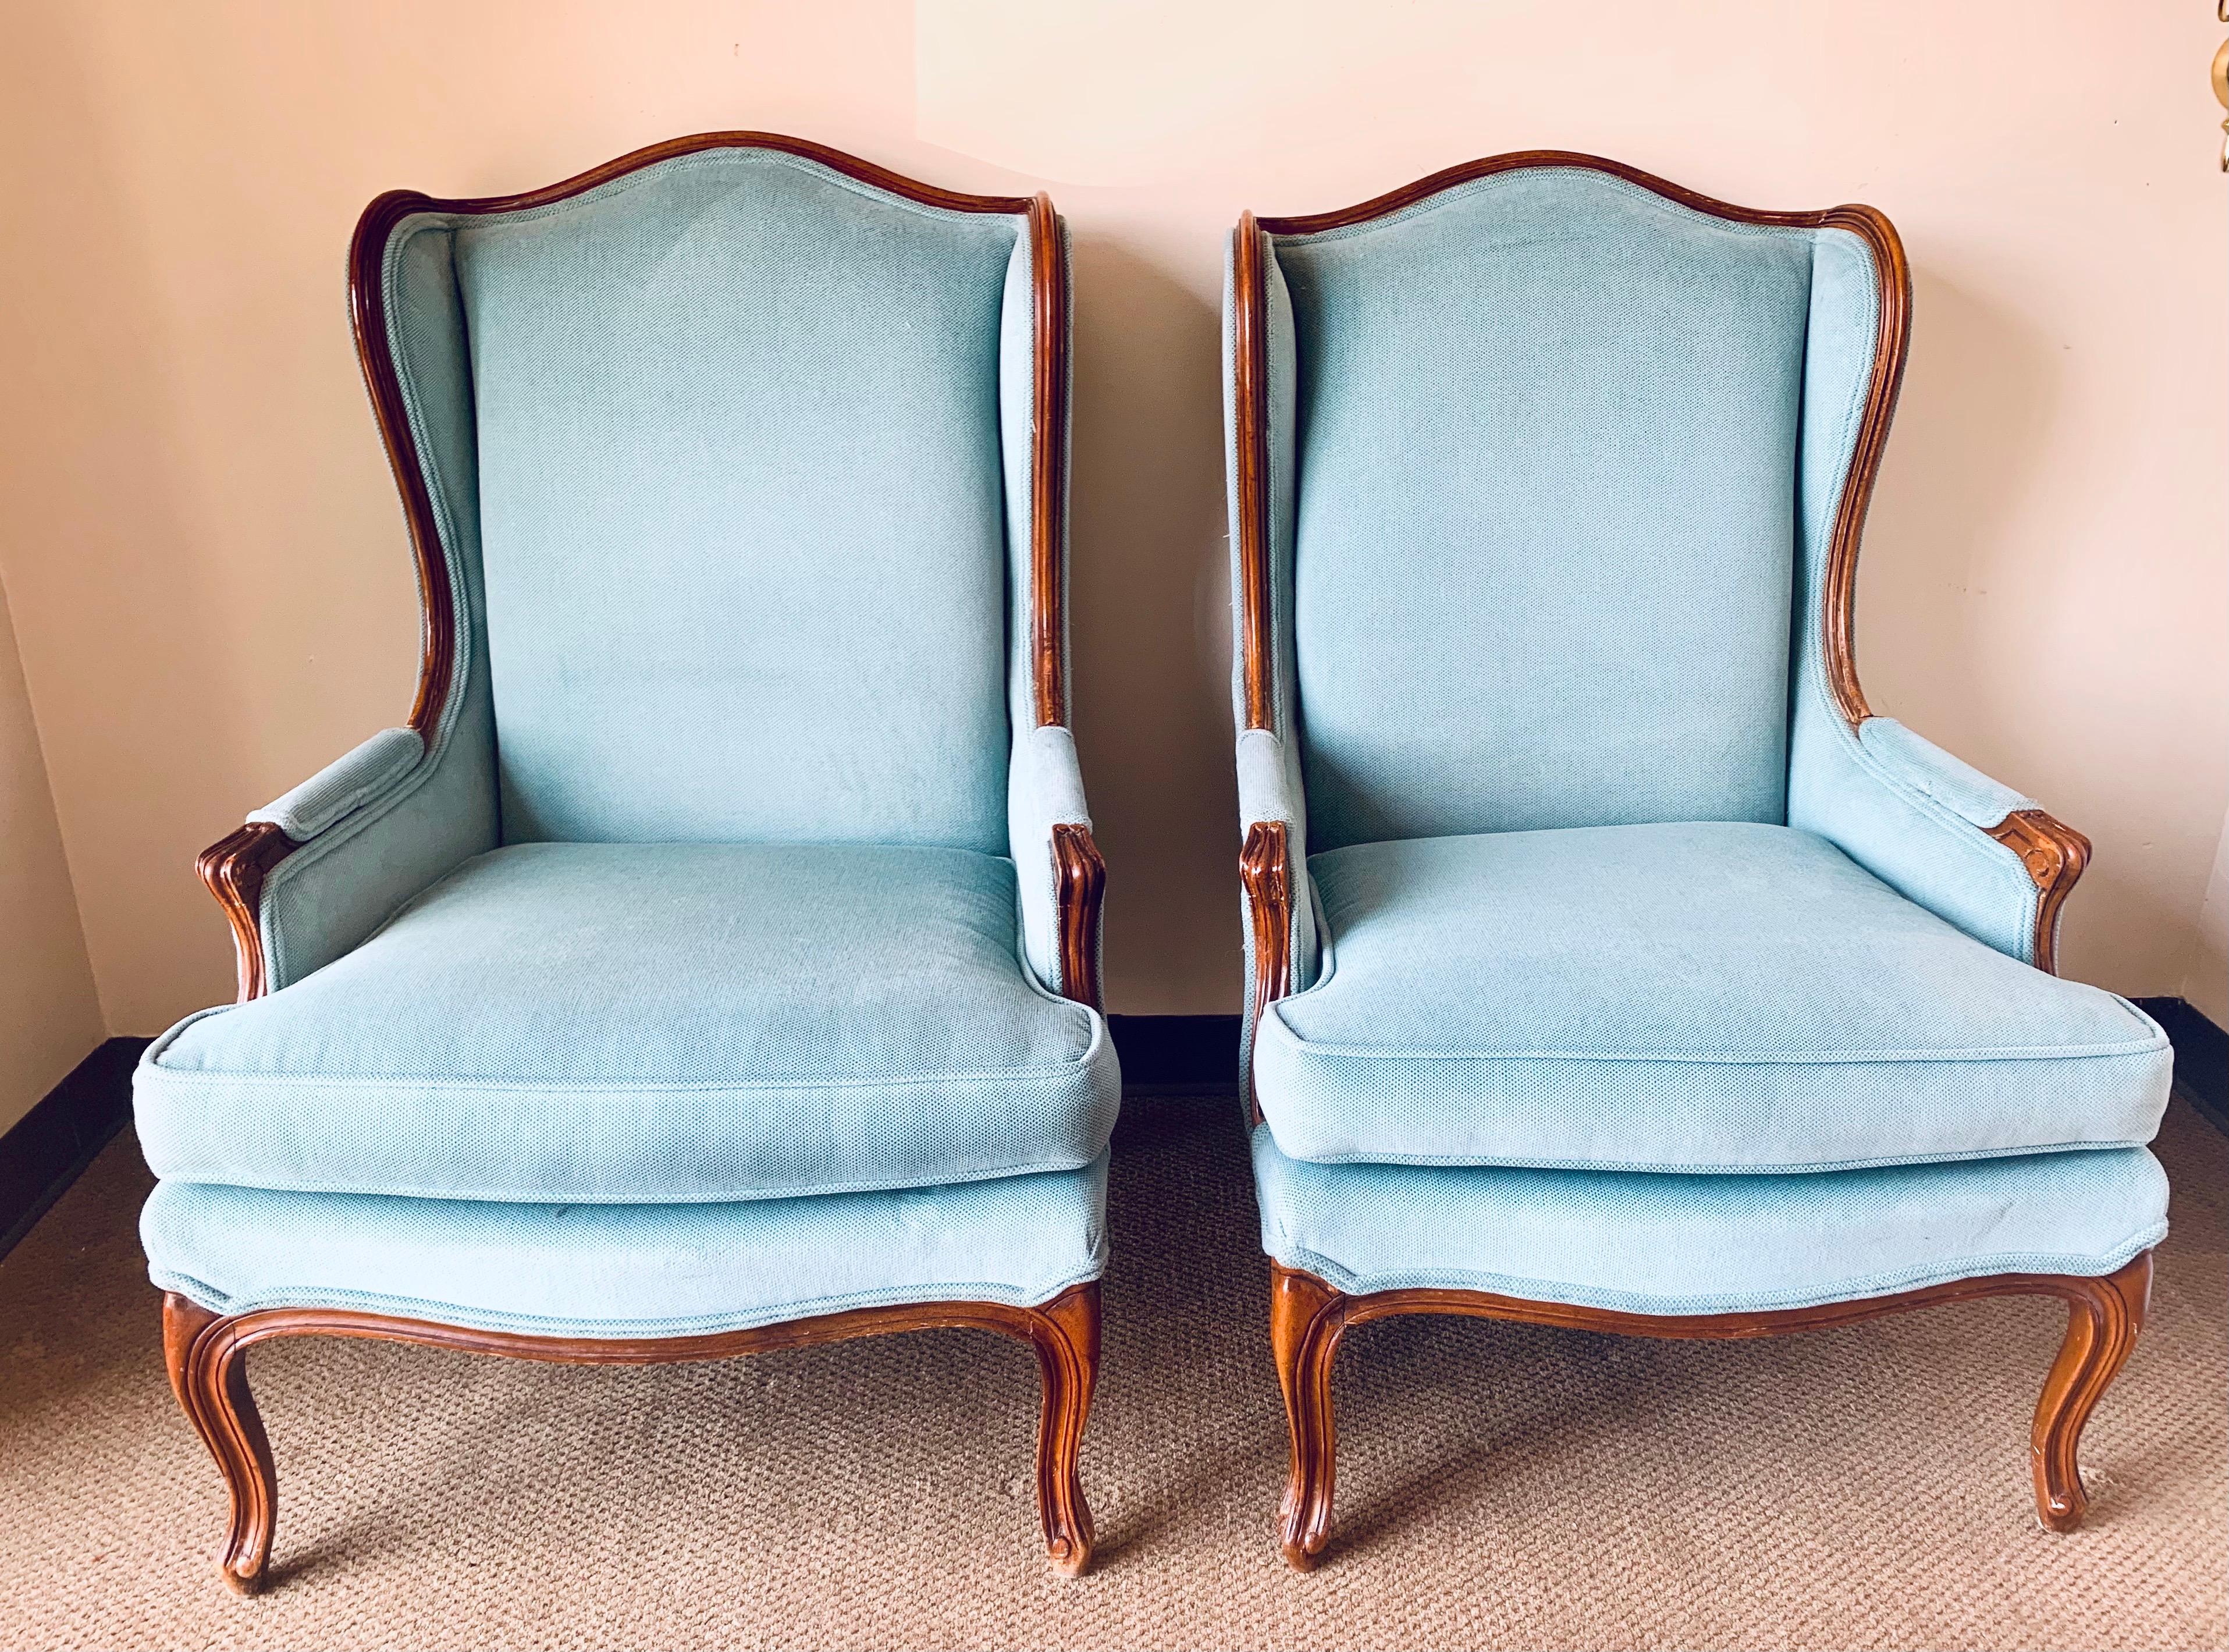 Elegant pair of vintage French wingbacks with the most gorgeous light blue cotton chenille upholstery. Small pulls on back corners. Now, more than ever, home is where the heart is.